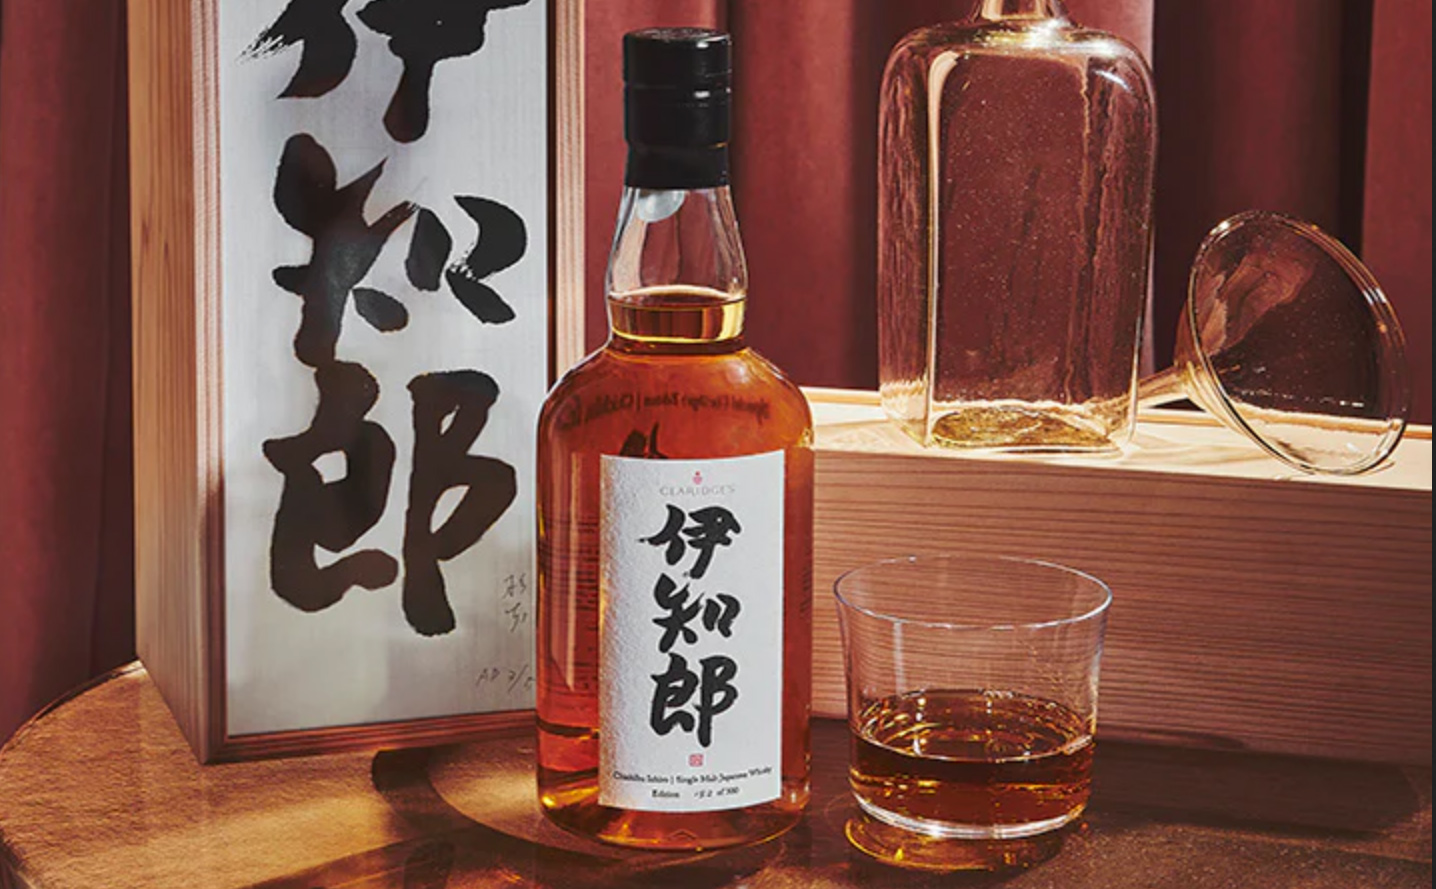 Claridge’s Now Has Its Own Super Rare Japanese Whisky